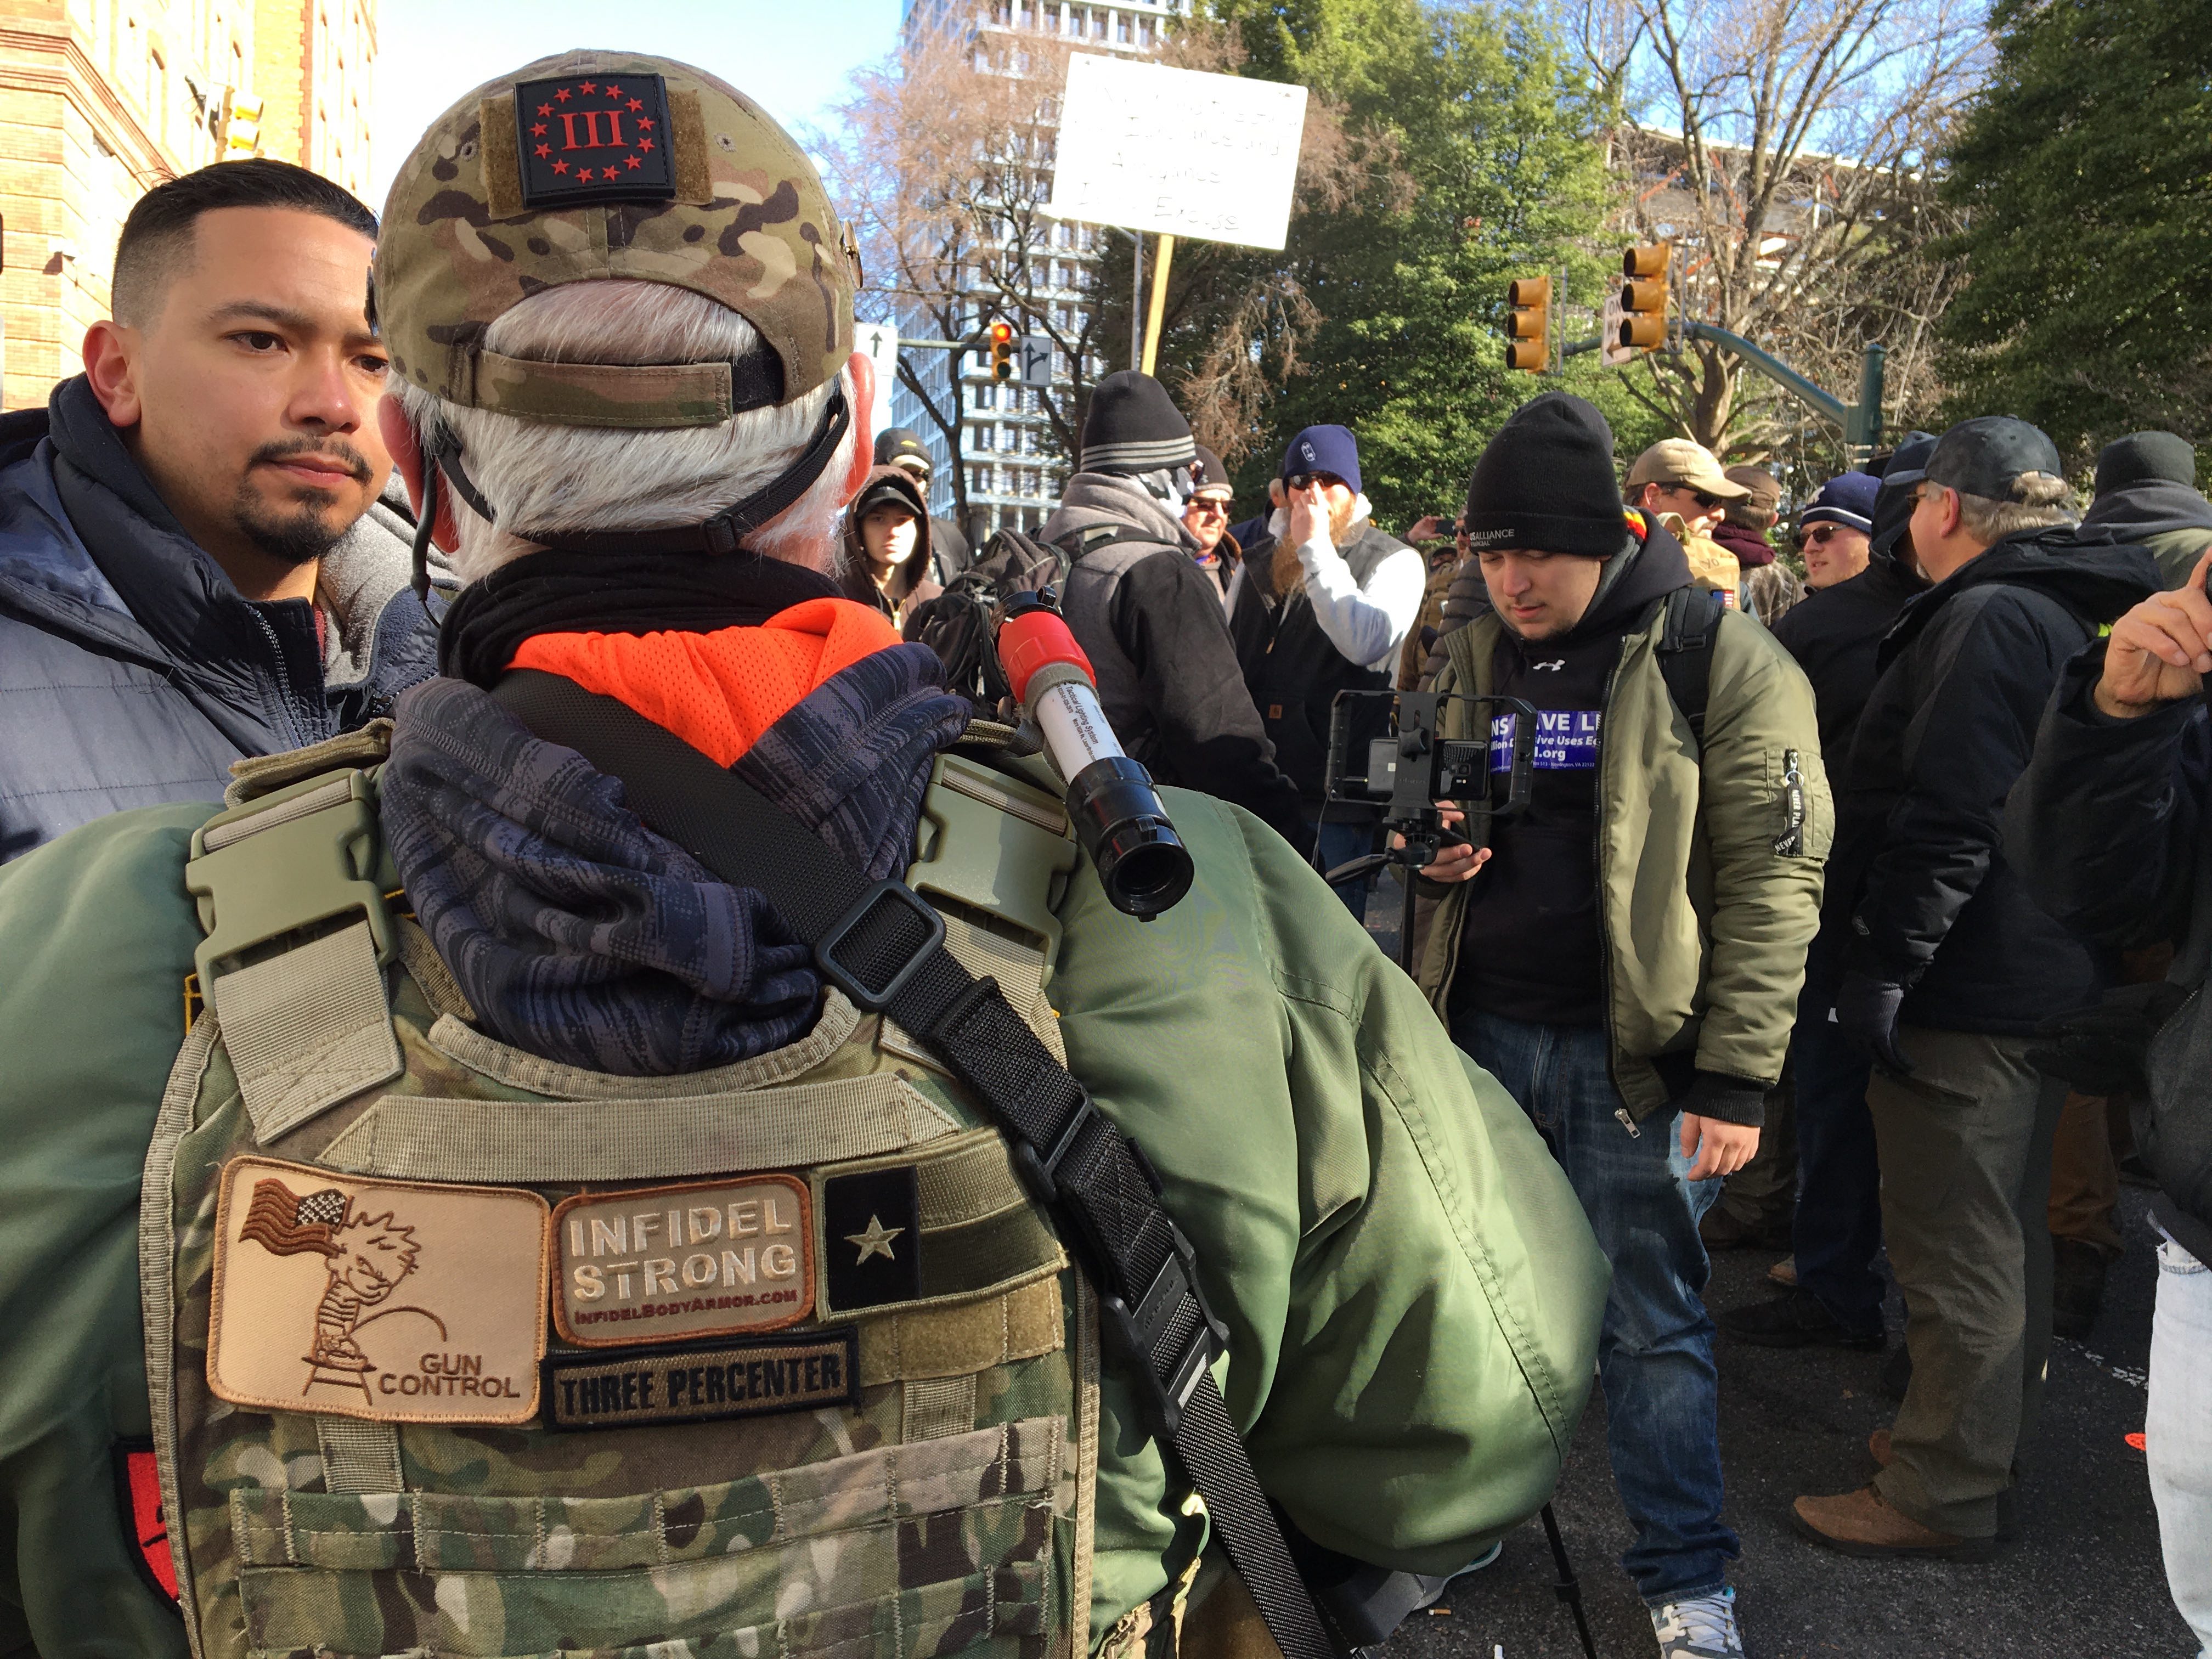 One protester in military garb wears patches with far-right III Percenter emblems on his vest and hat. (Sheren Khalel/MEE) 